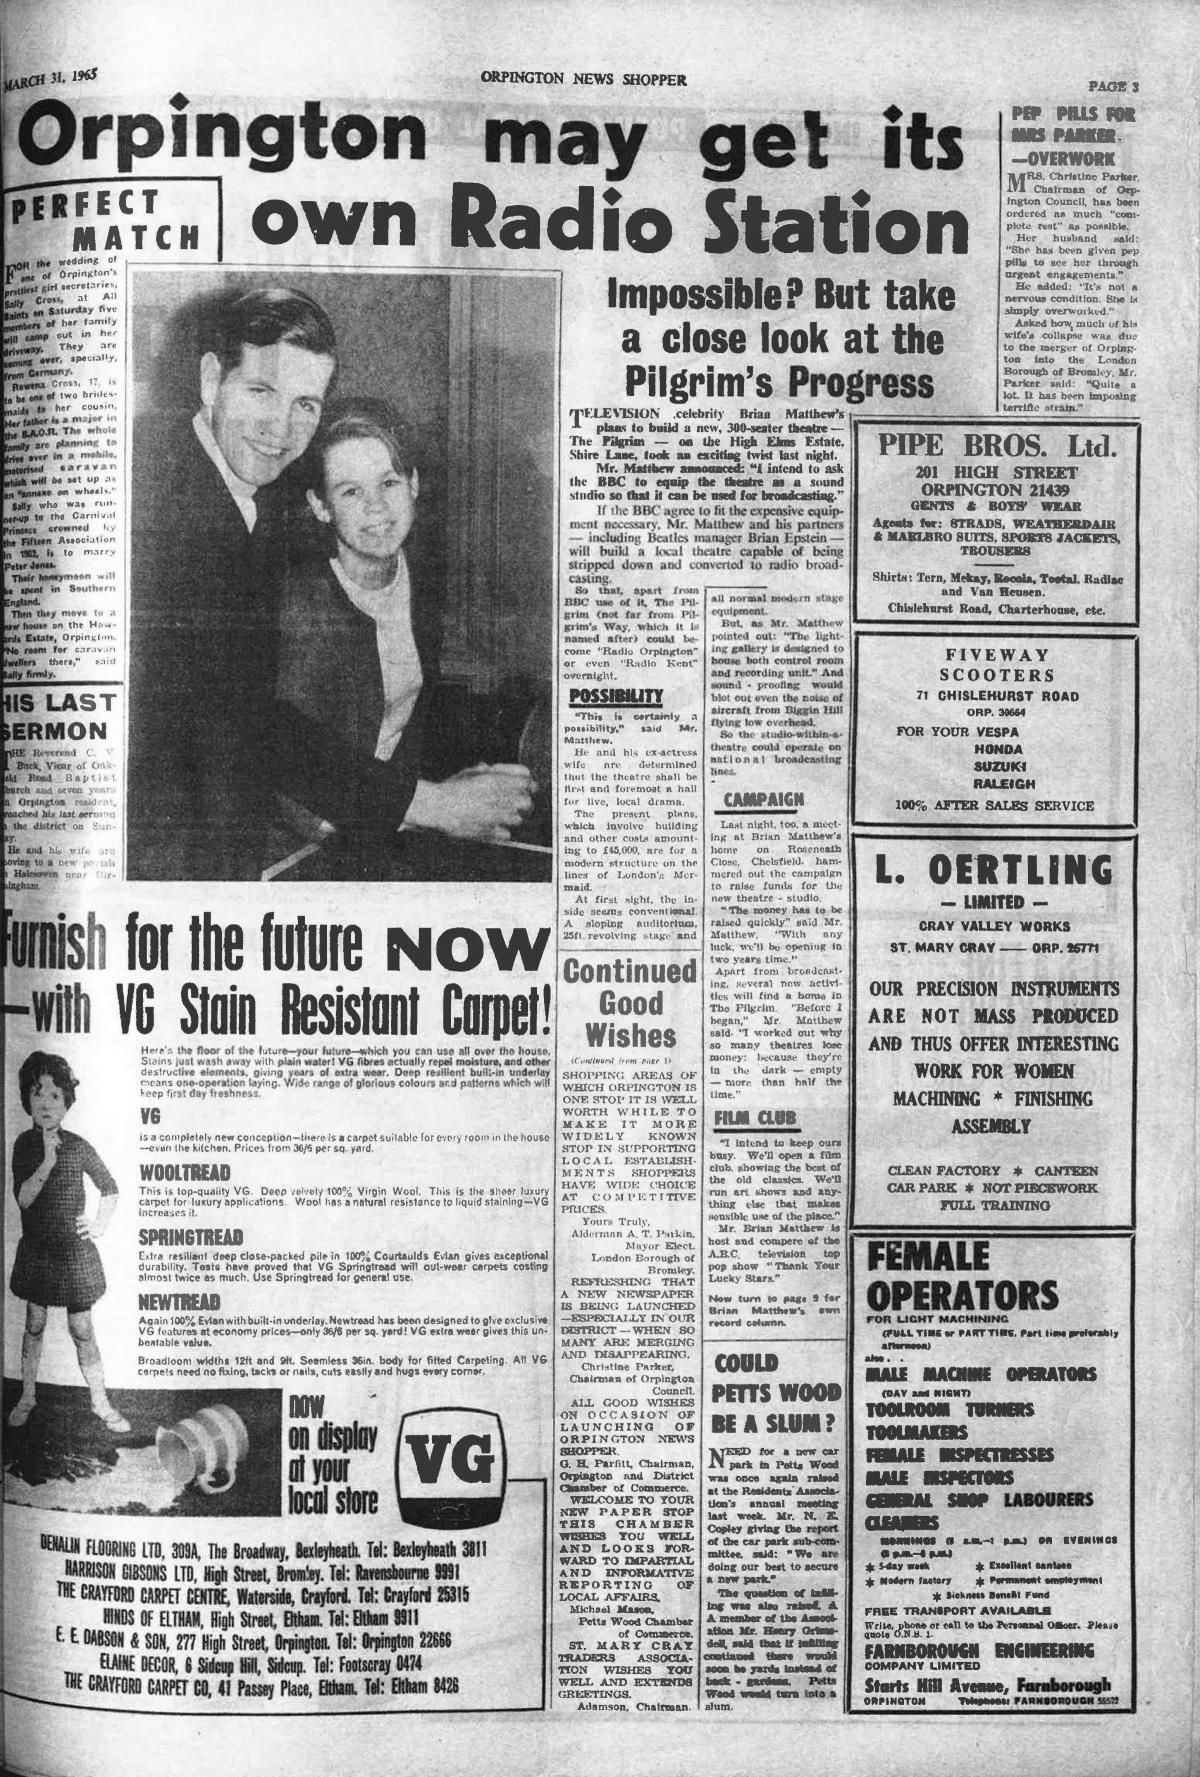 Black and white over 12 pages, look back at the first ever edition of the Orpington News Shopper published in 1965.